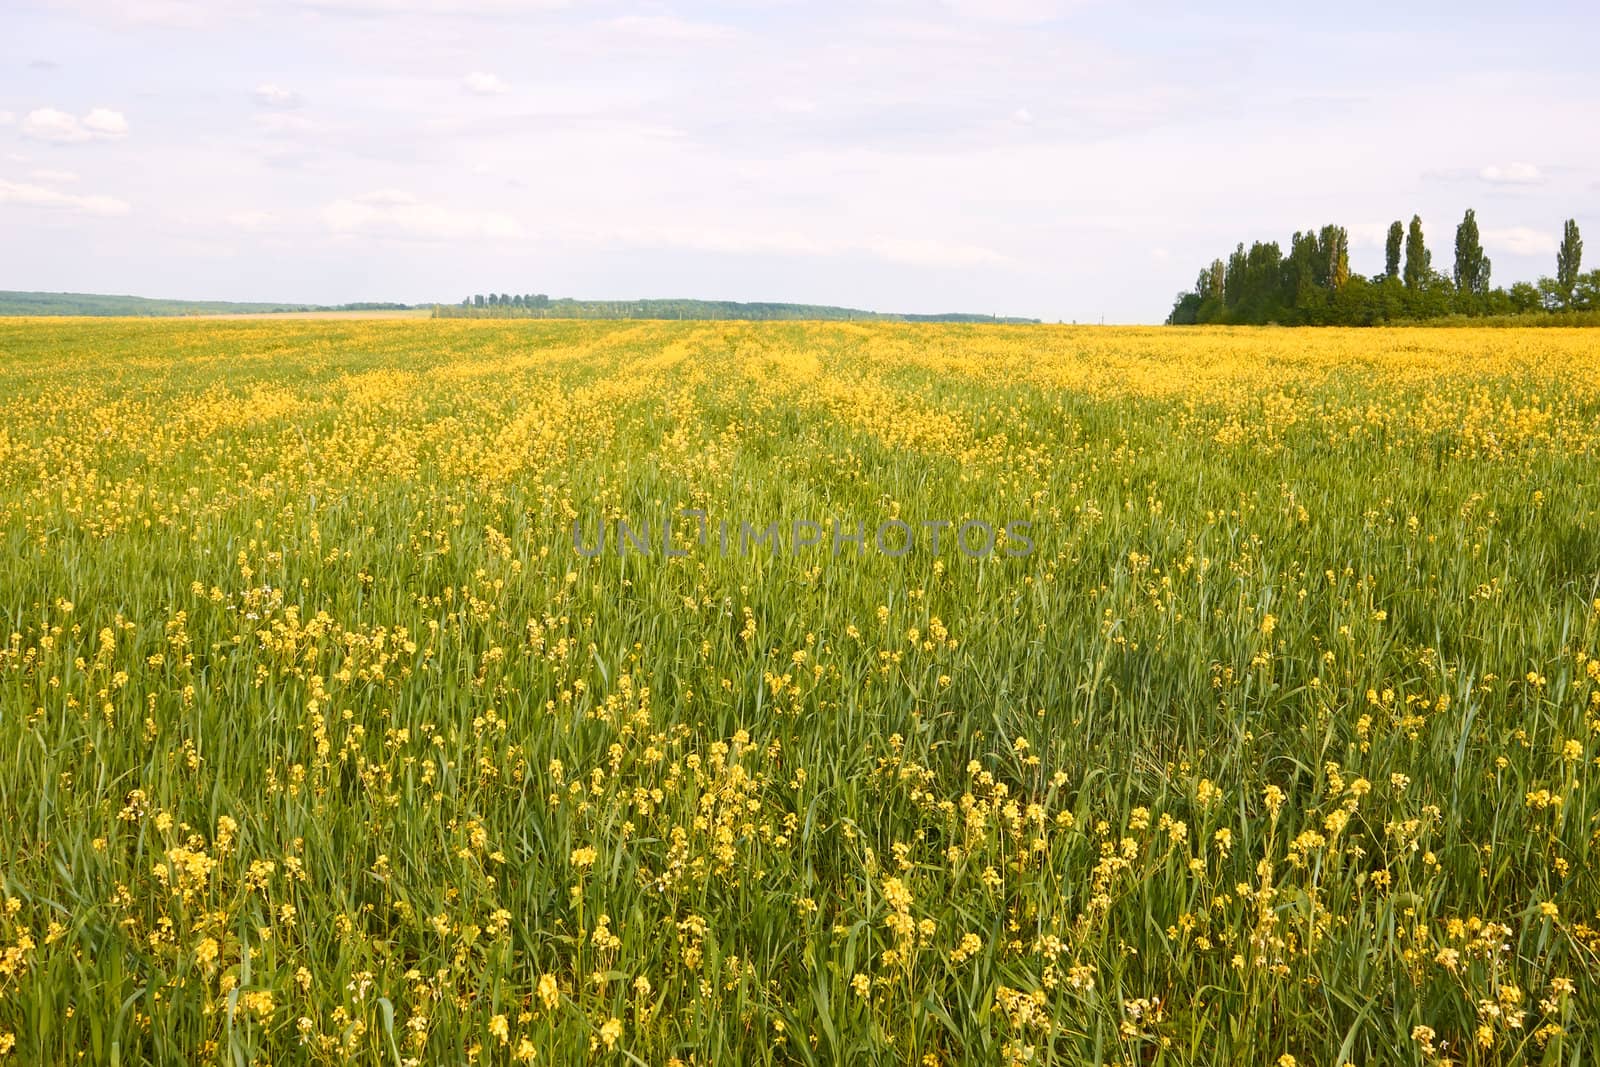 Rural landscape. Wide field with mixture of flowering rapeseed and barley